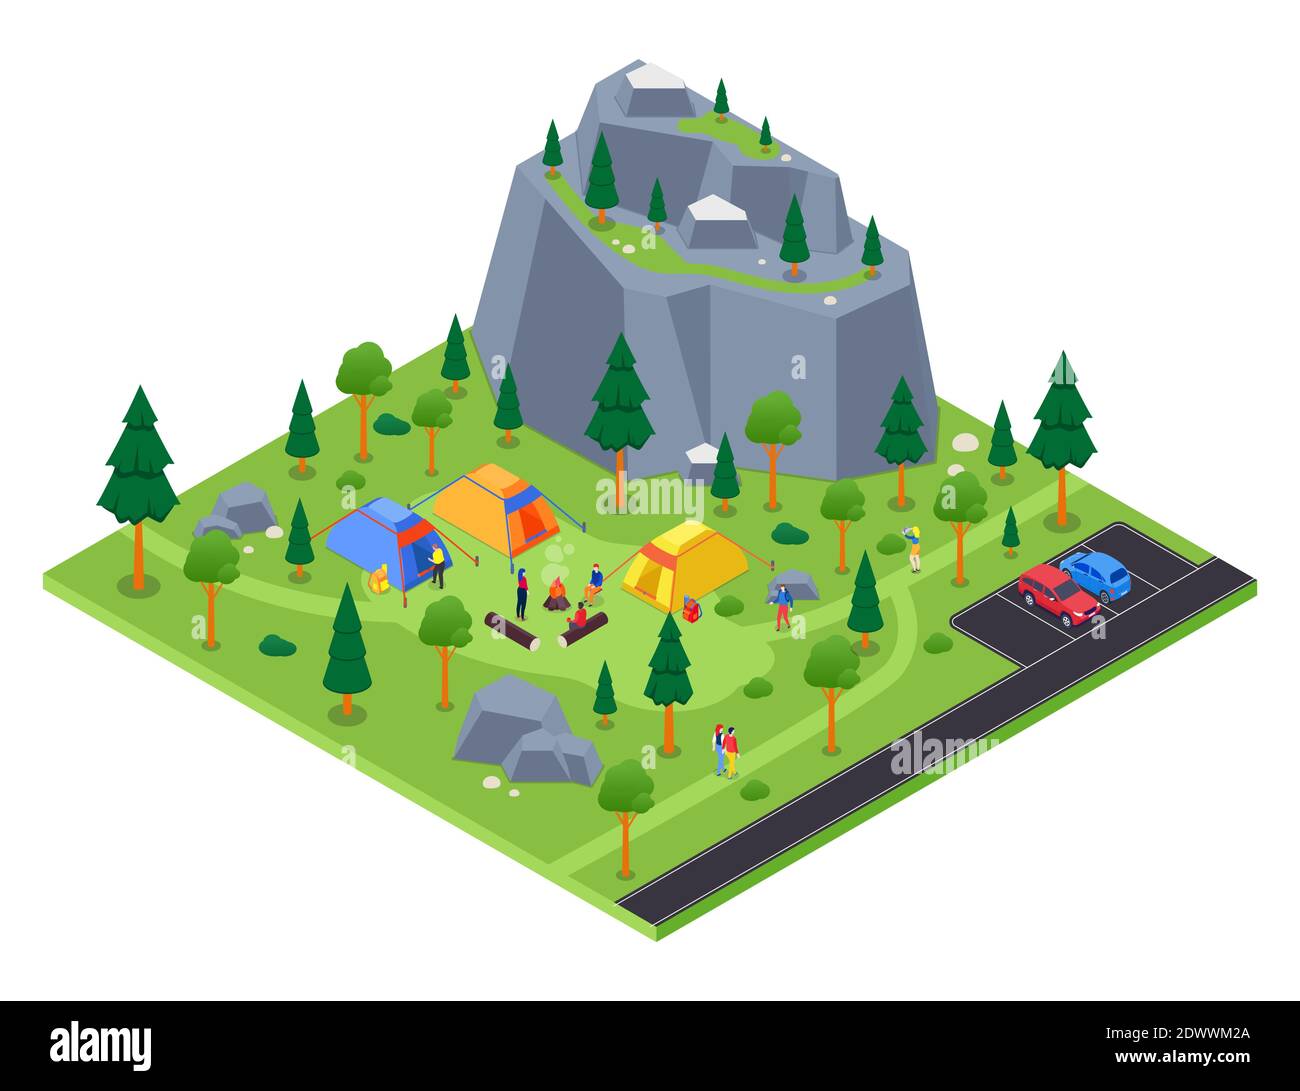 Camping site - modern vector colorful isometric illustration. Landscape with a mountain, tents in the forest, trees and rocks, parking lot. Tourists s Stock Vector